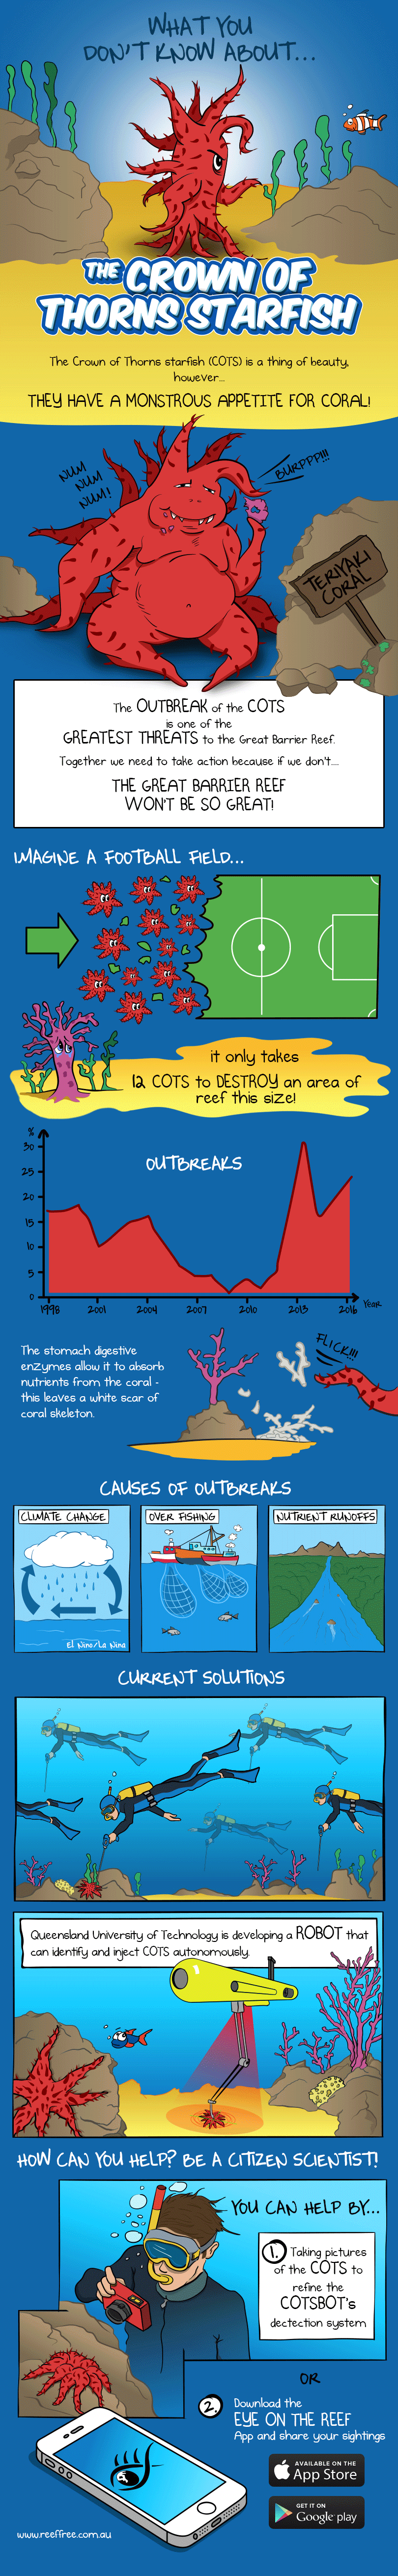 The Crown of Thorns Starfish Outbreak